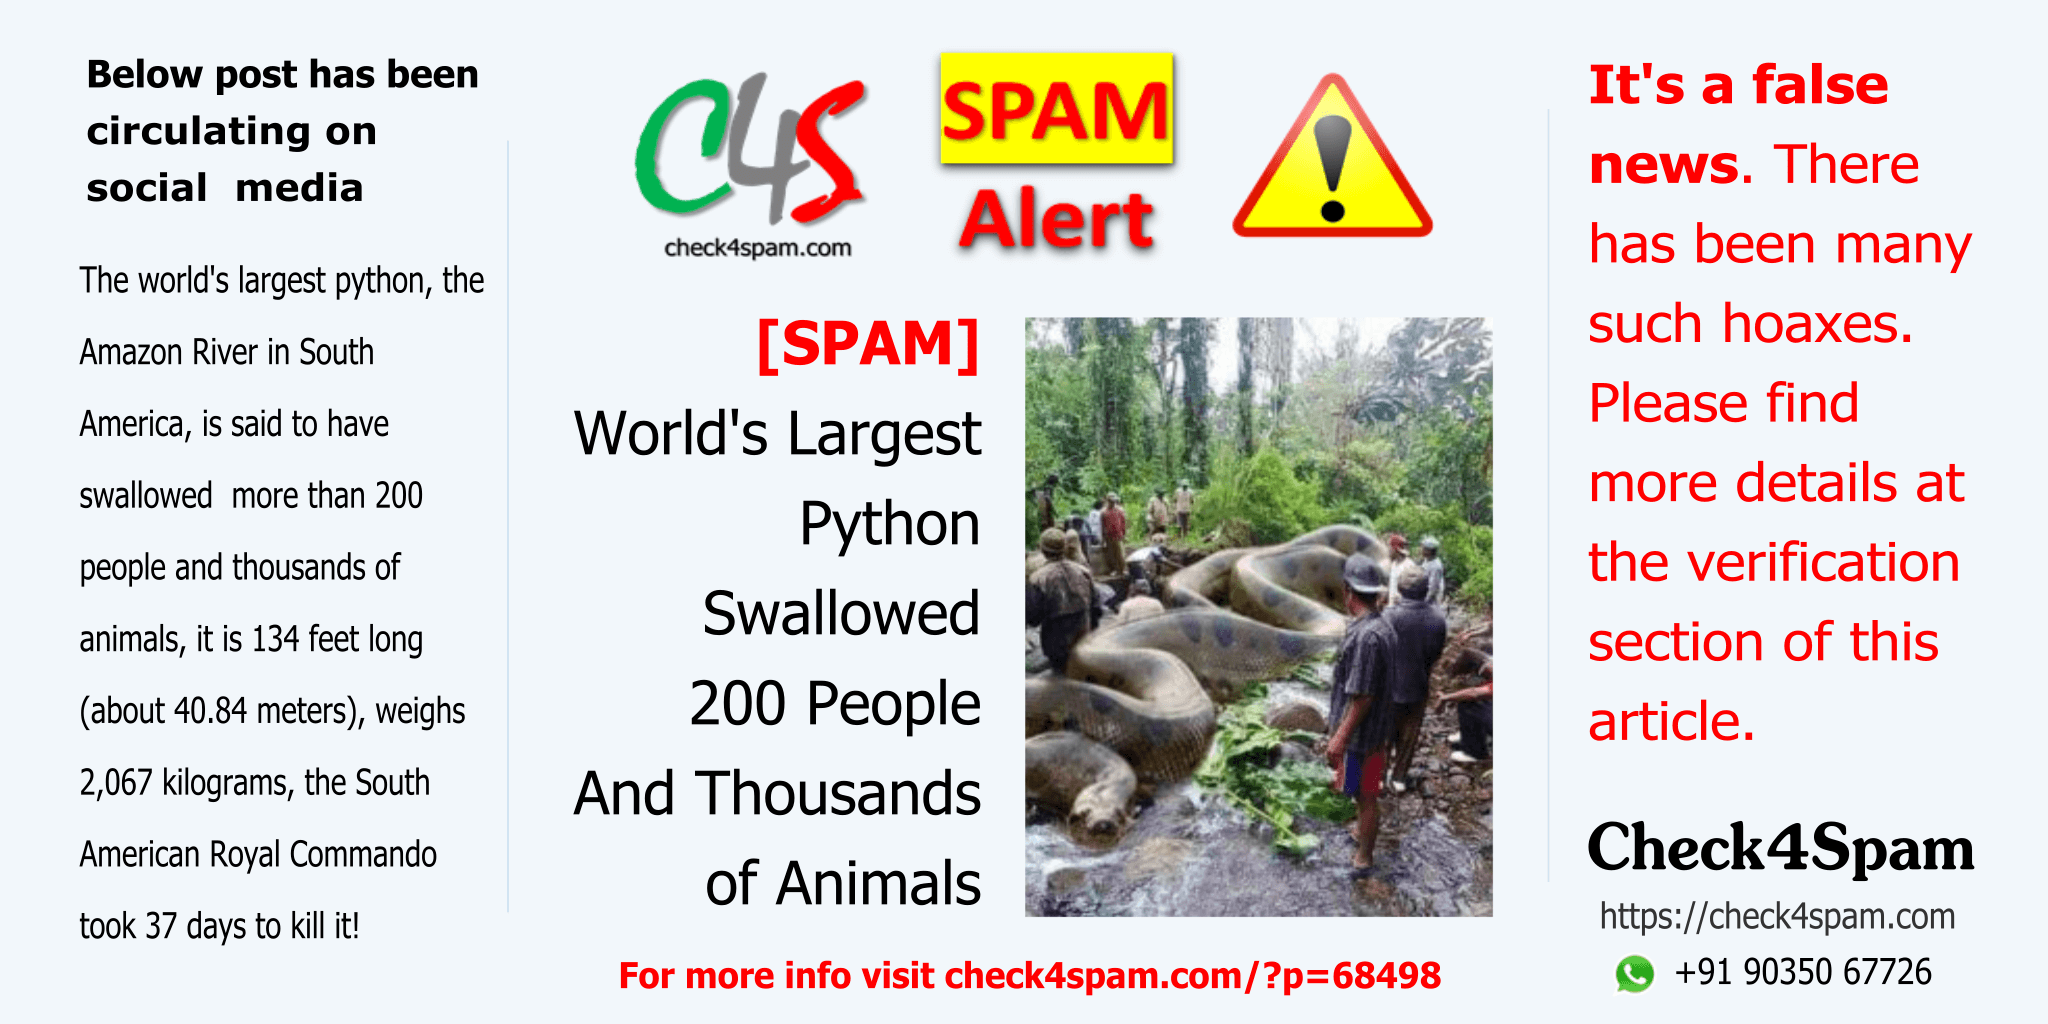 World's Largest Python Swallowed 200 People Thousands Animals - SPAM